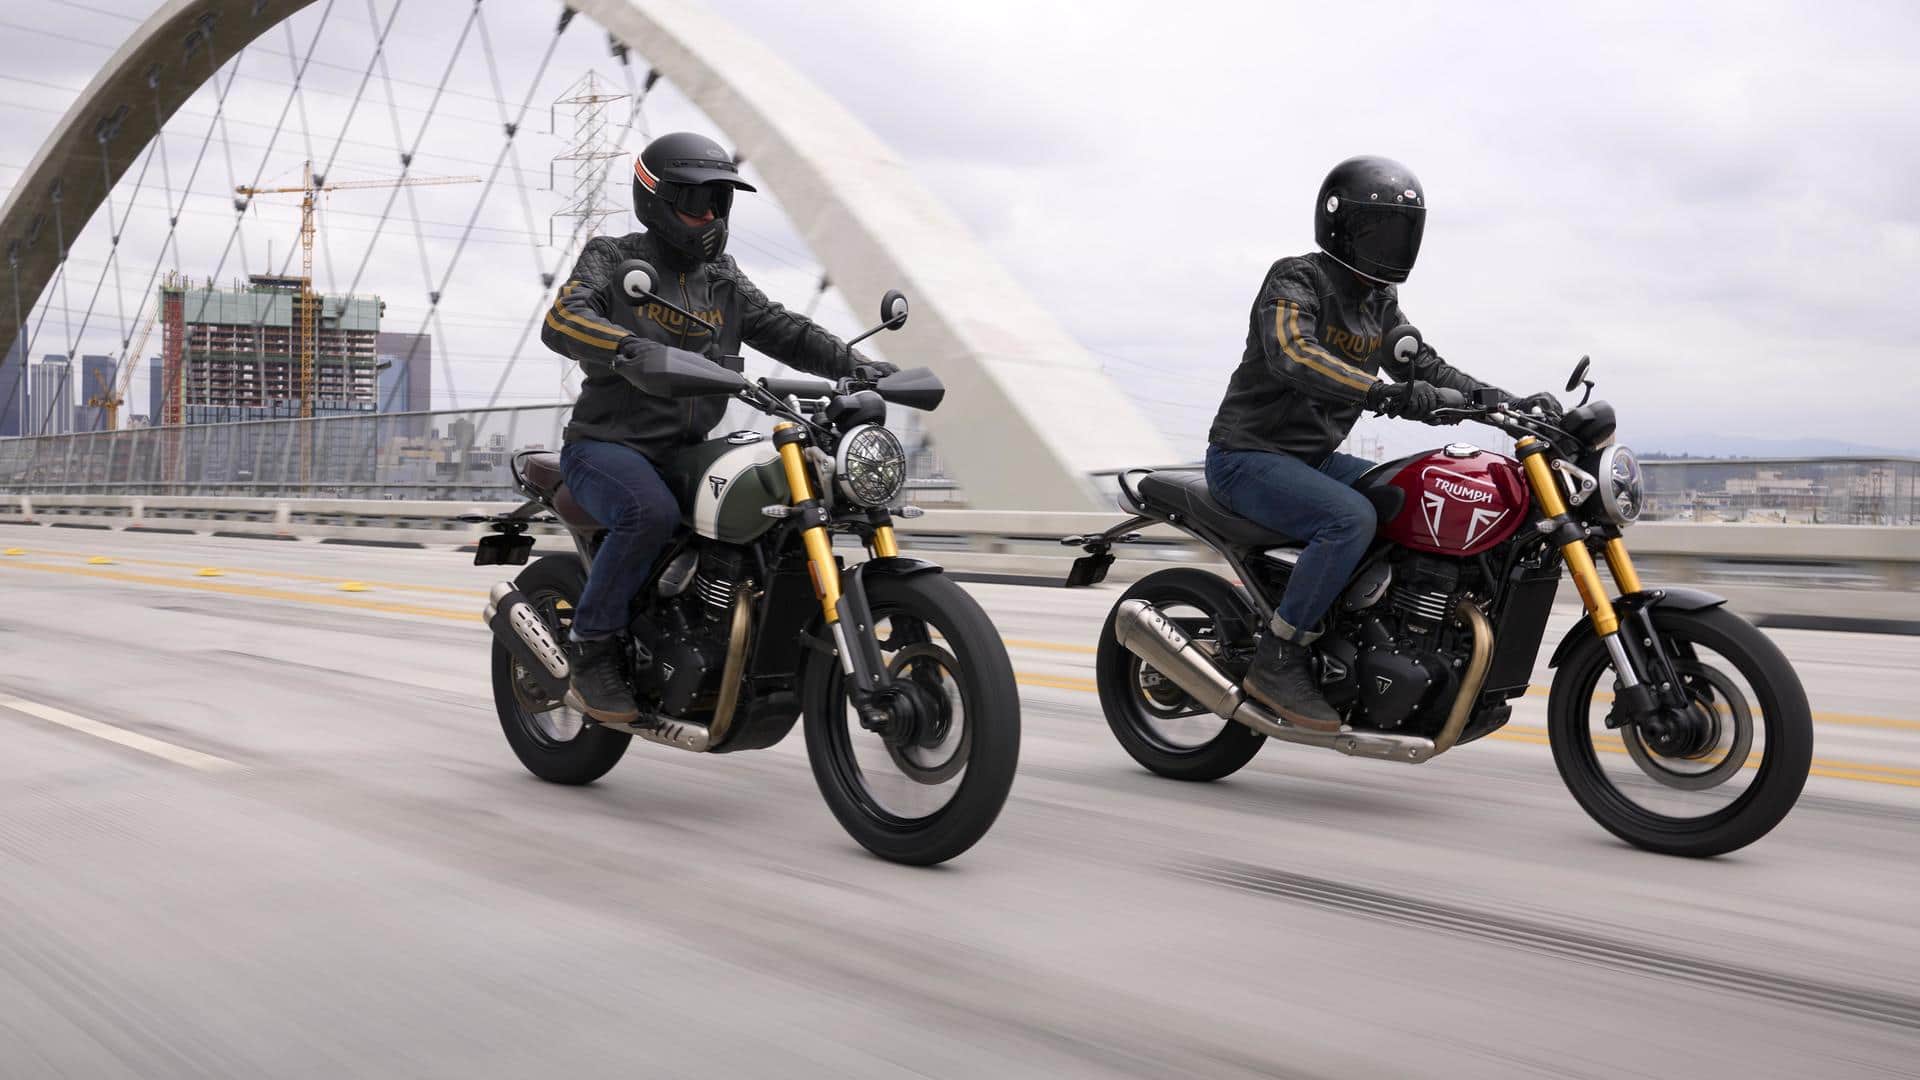 Official accessories of all-new Triumph 400 twins explained